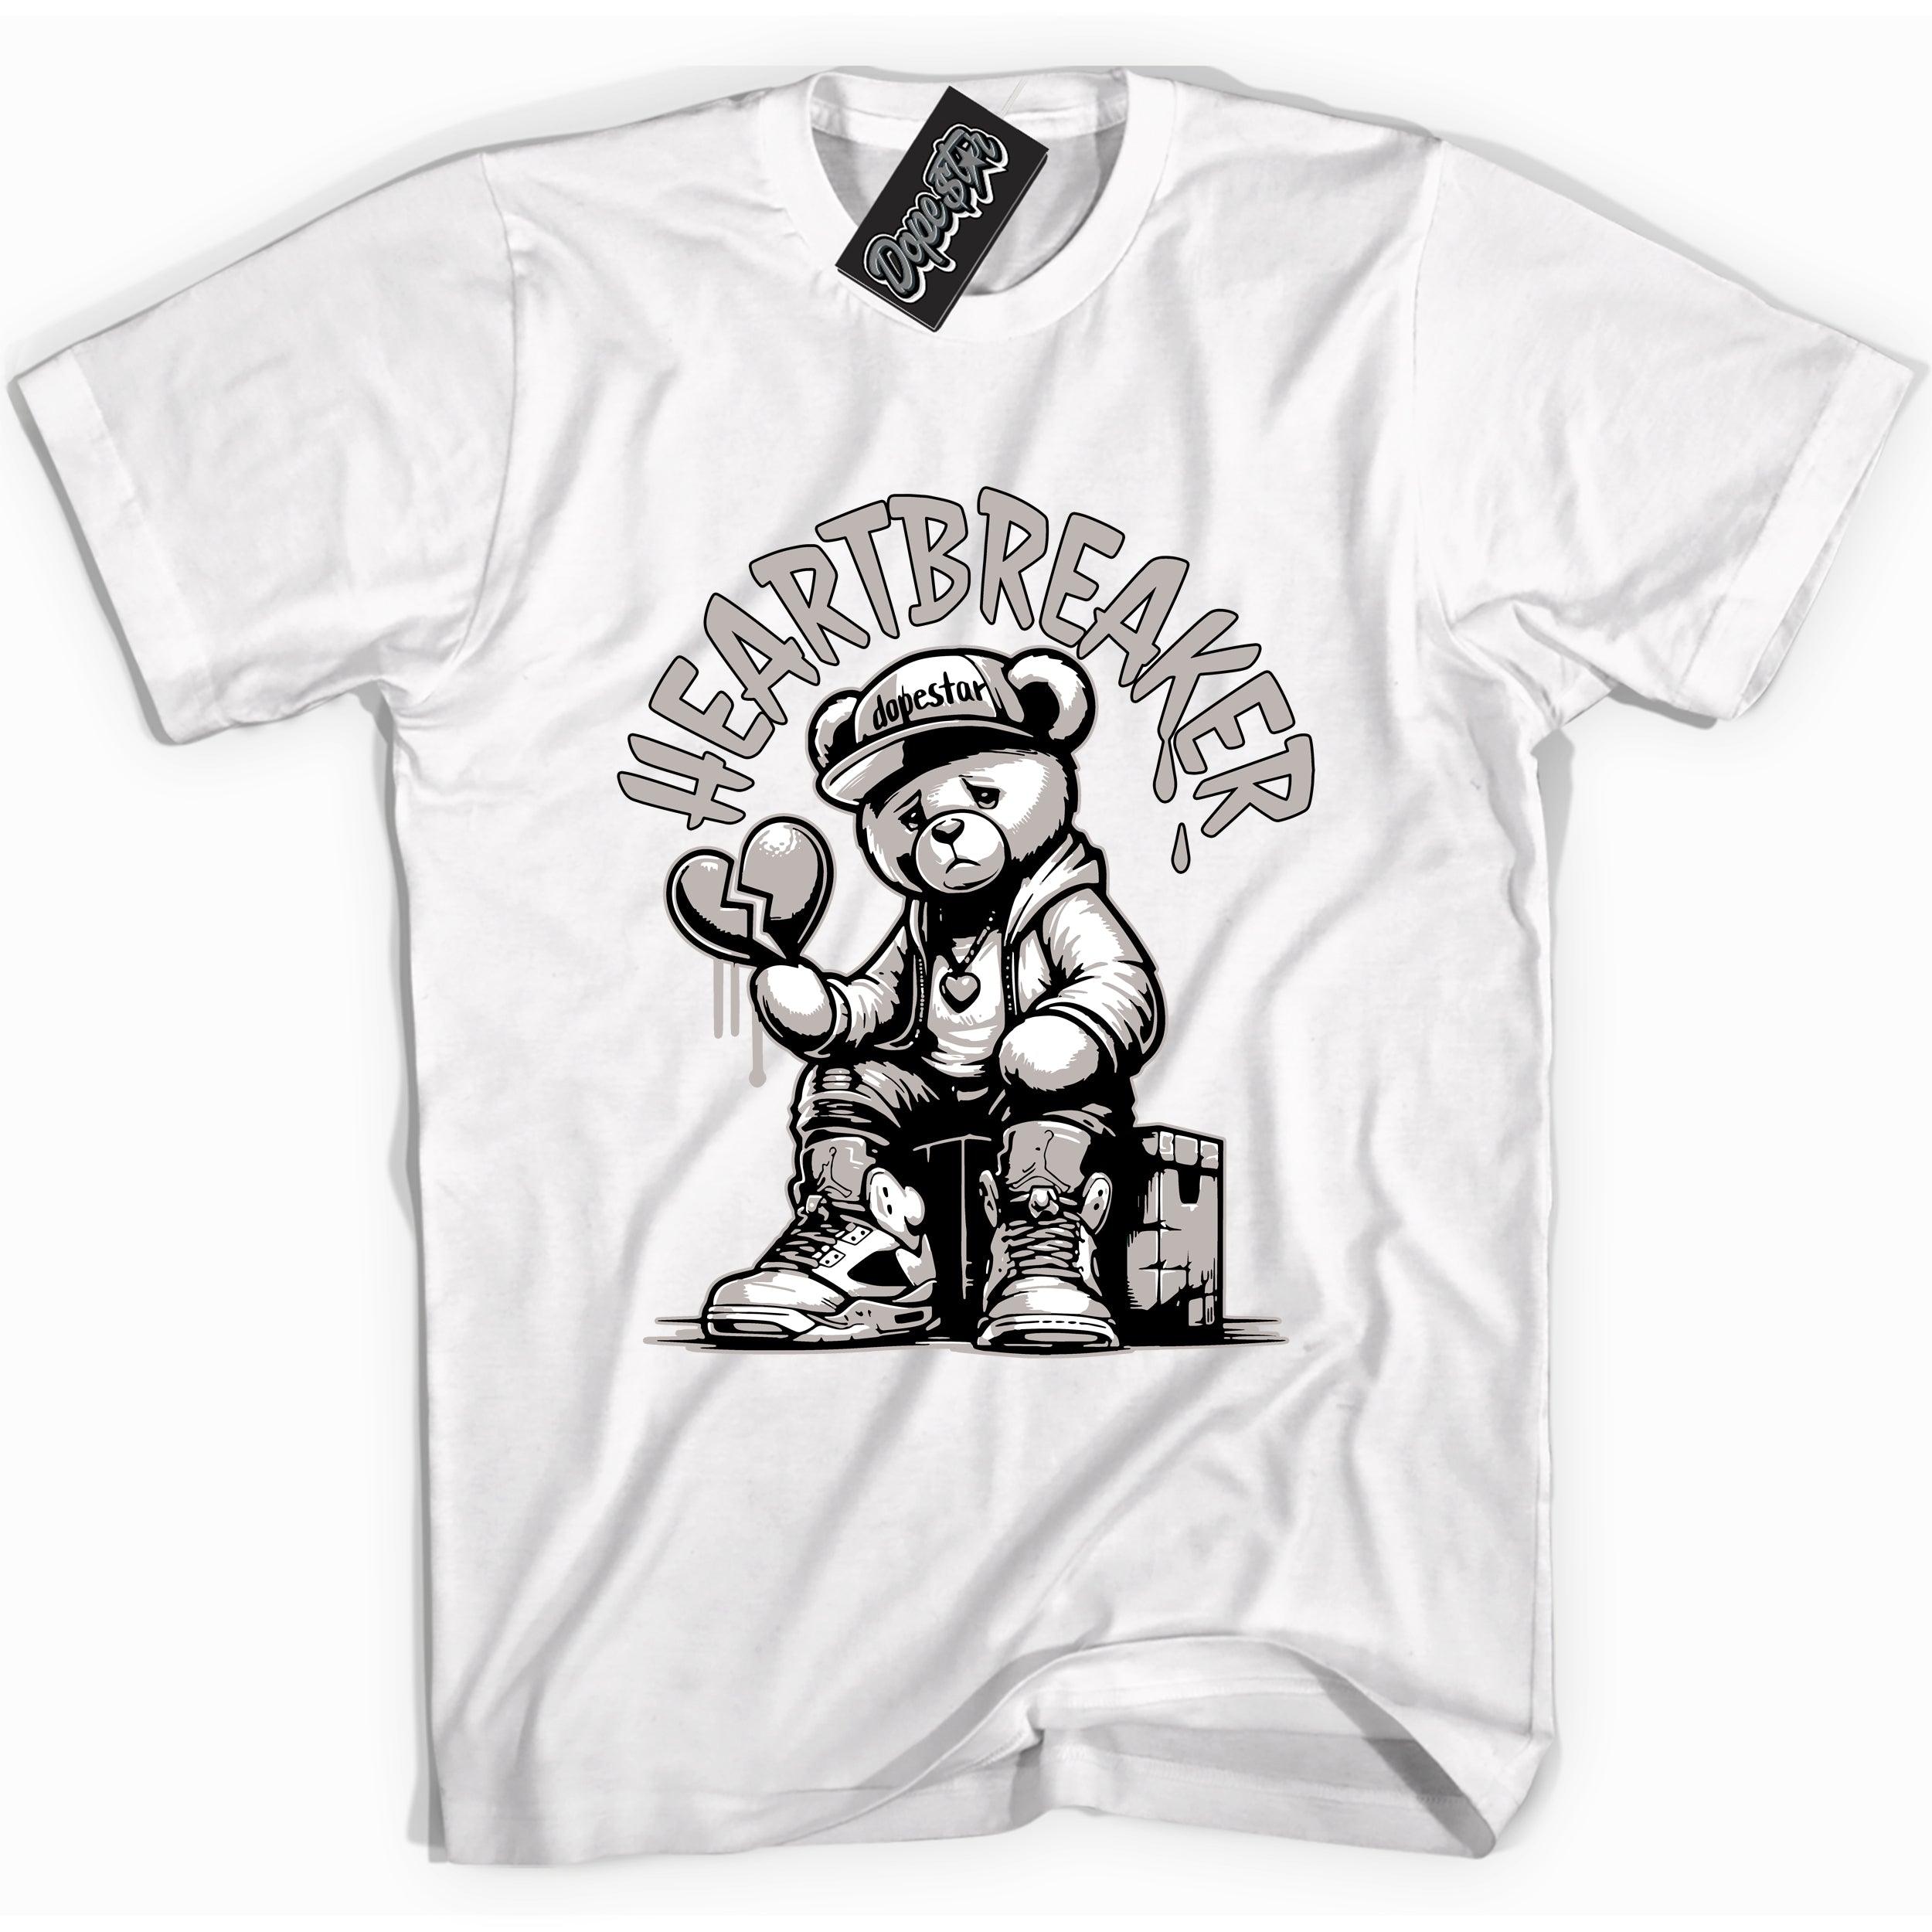 Cool White Shirt With Heartbreaker Bear design That Perfectly Matches AIR JORDAN 4 RETRO MILITARY BLACK Sneakers.